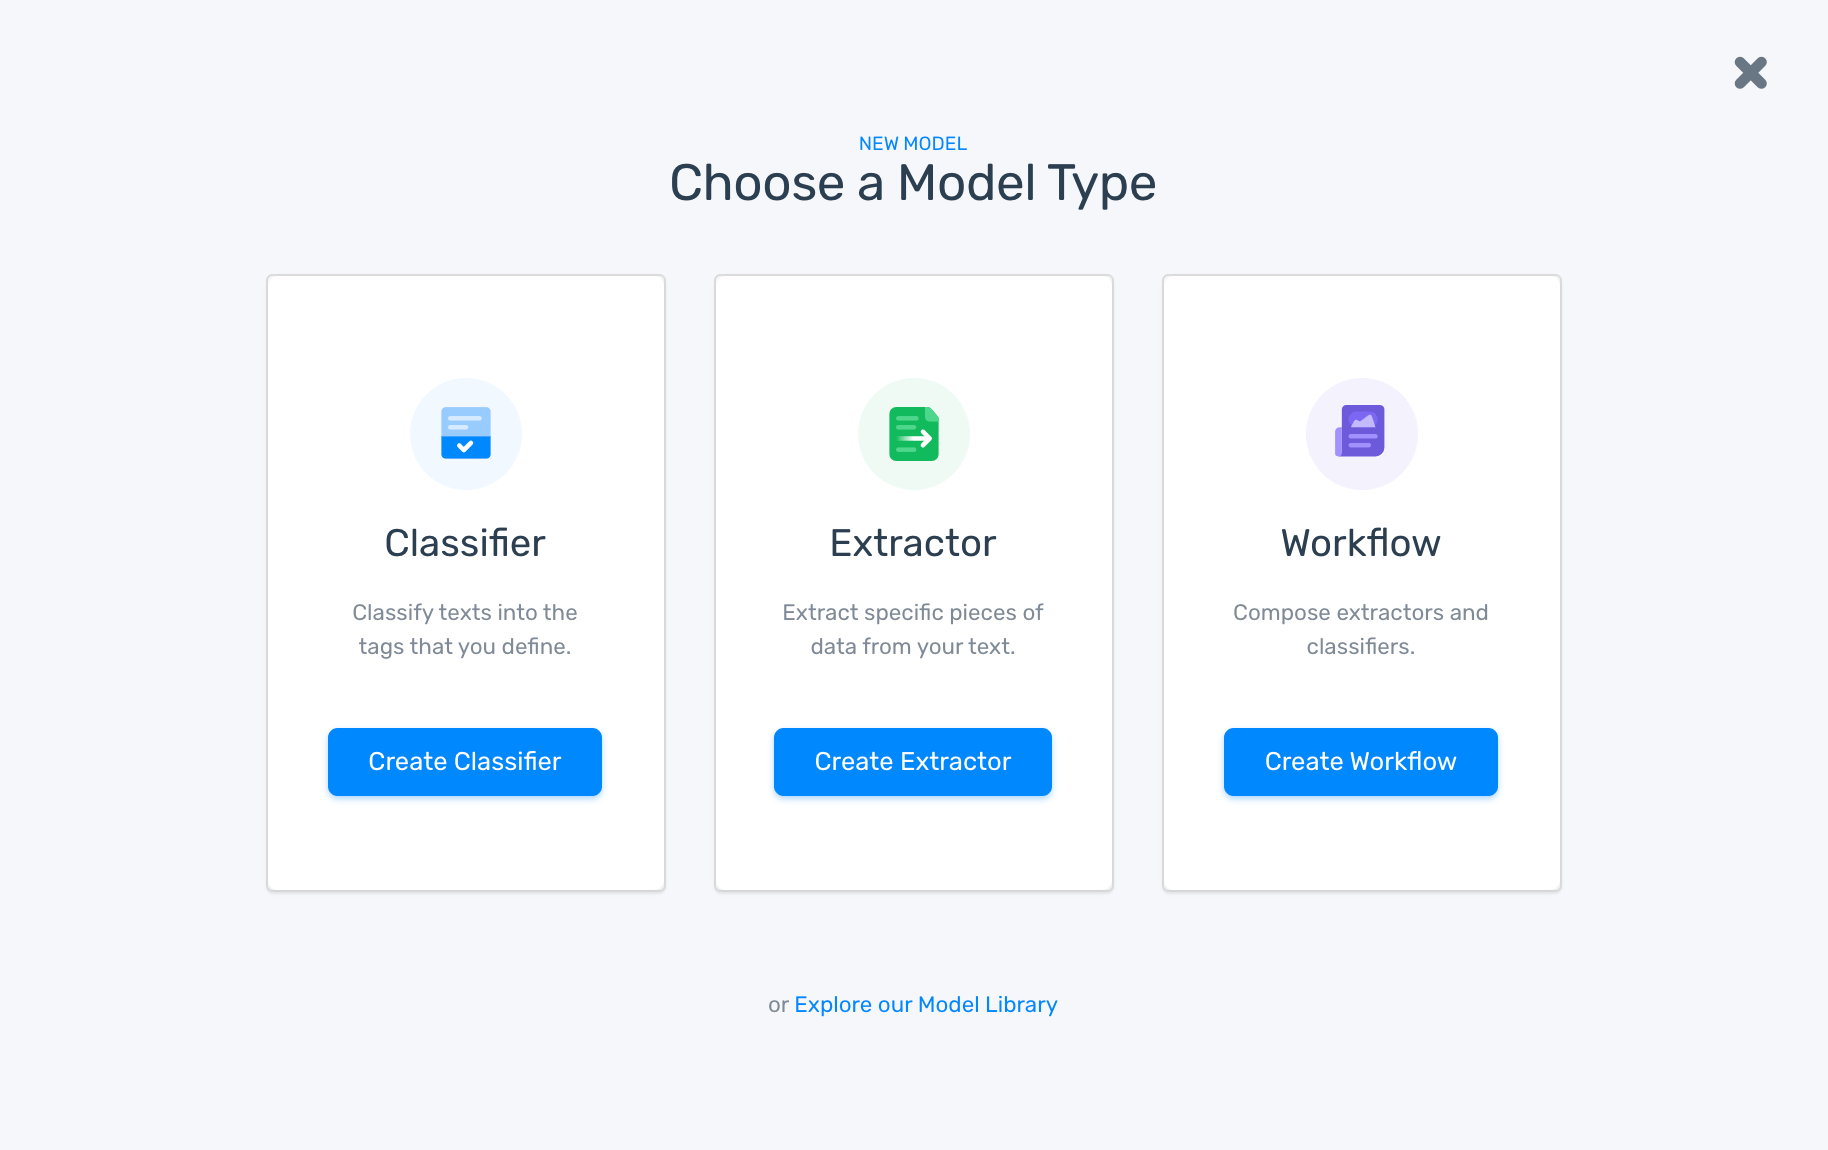 MonkeyLearn's model builder with the option to choose to build an extractor or classifier